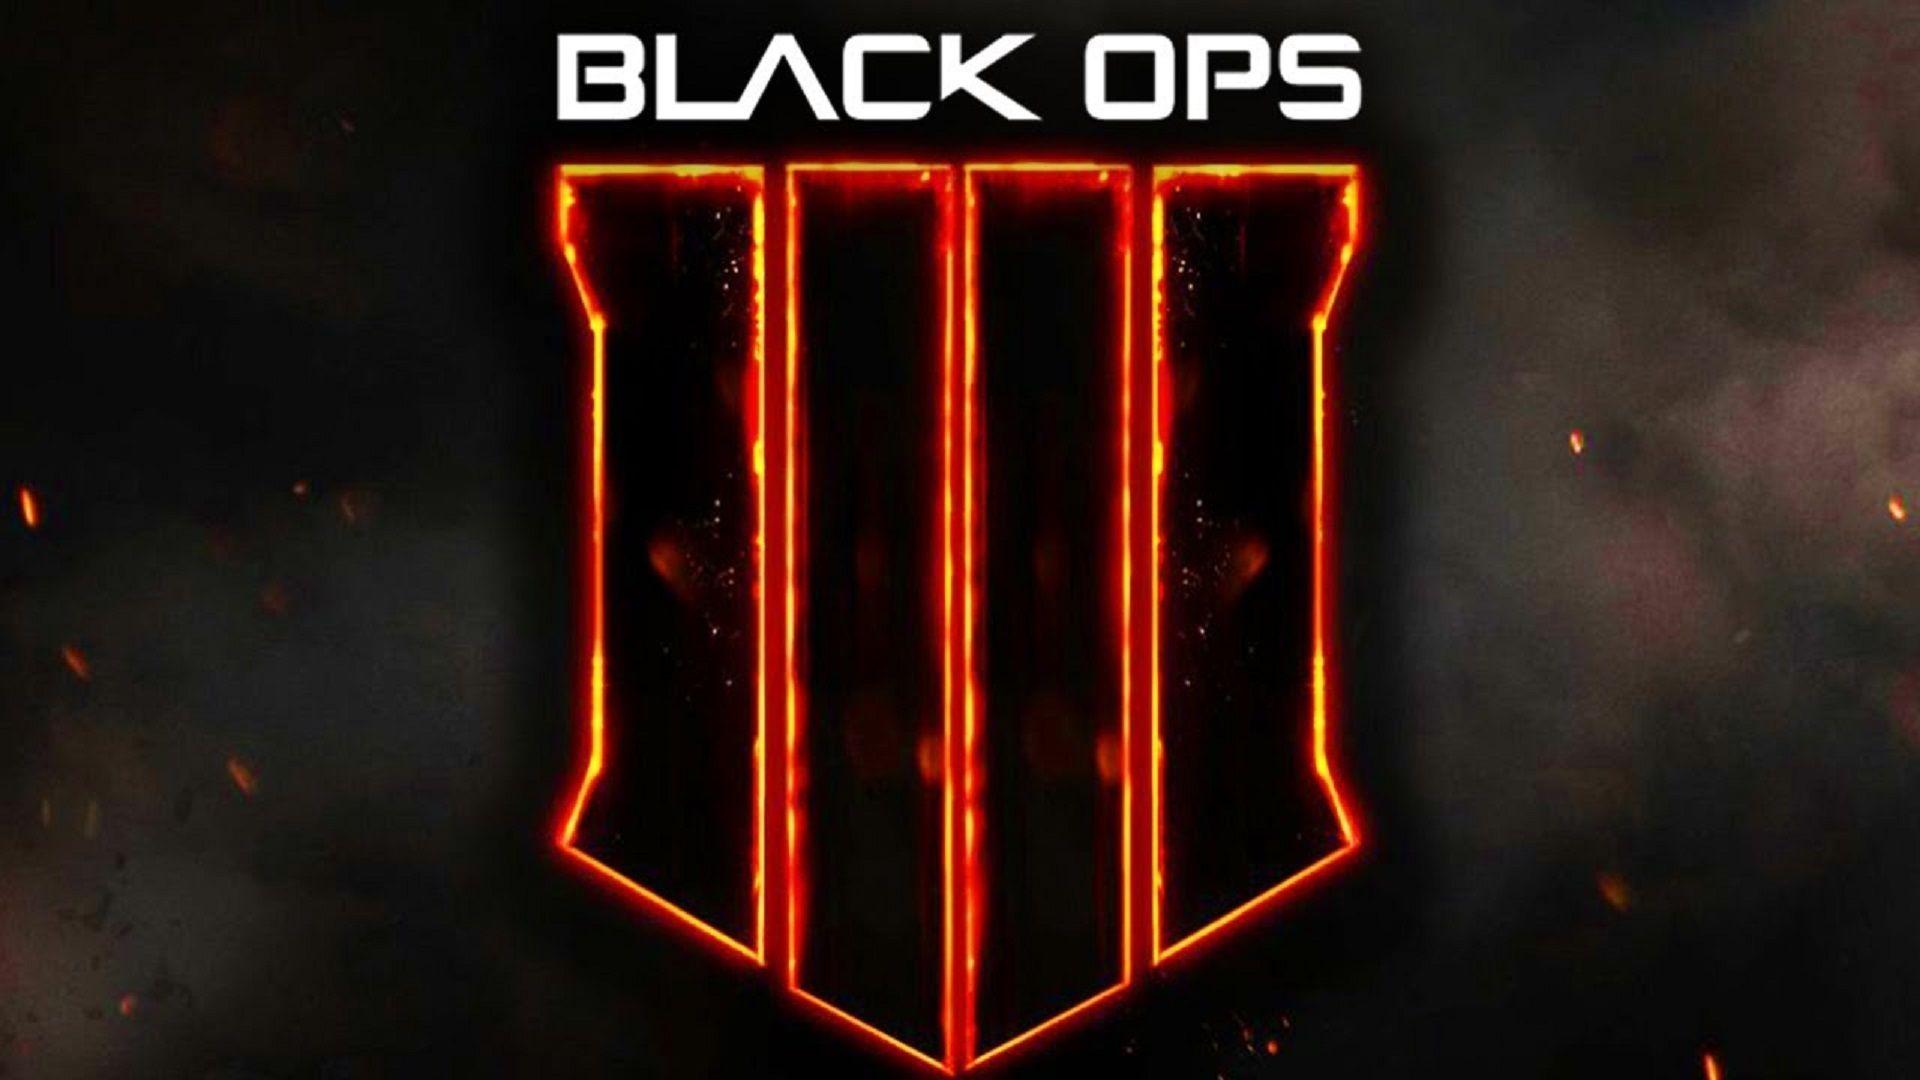 iphone x call of duty black ops 4 image